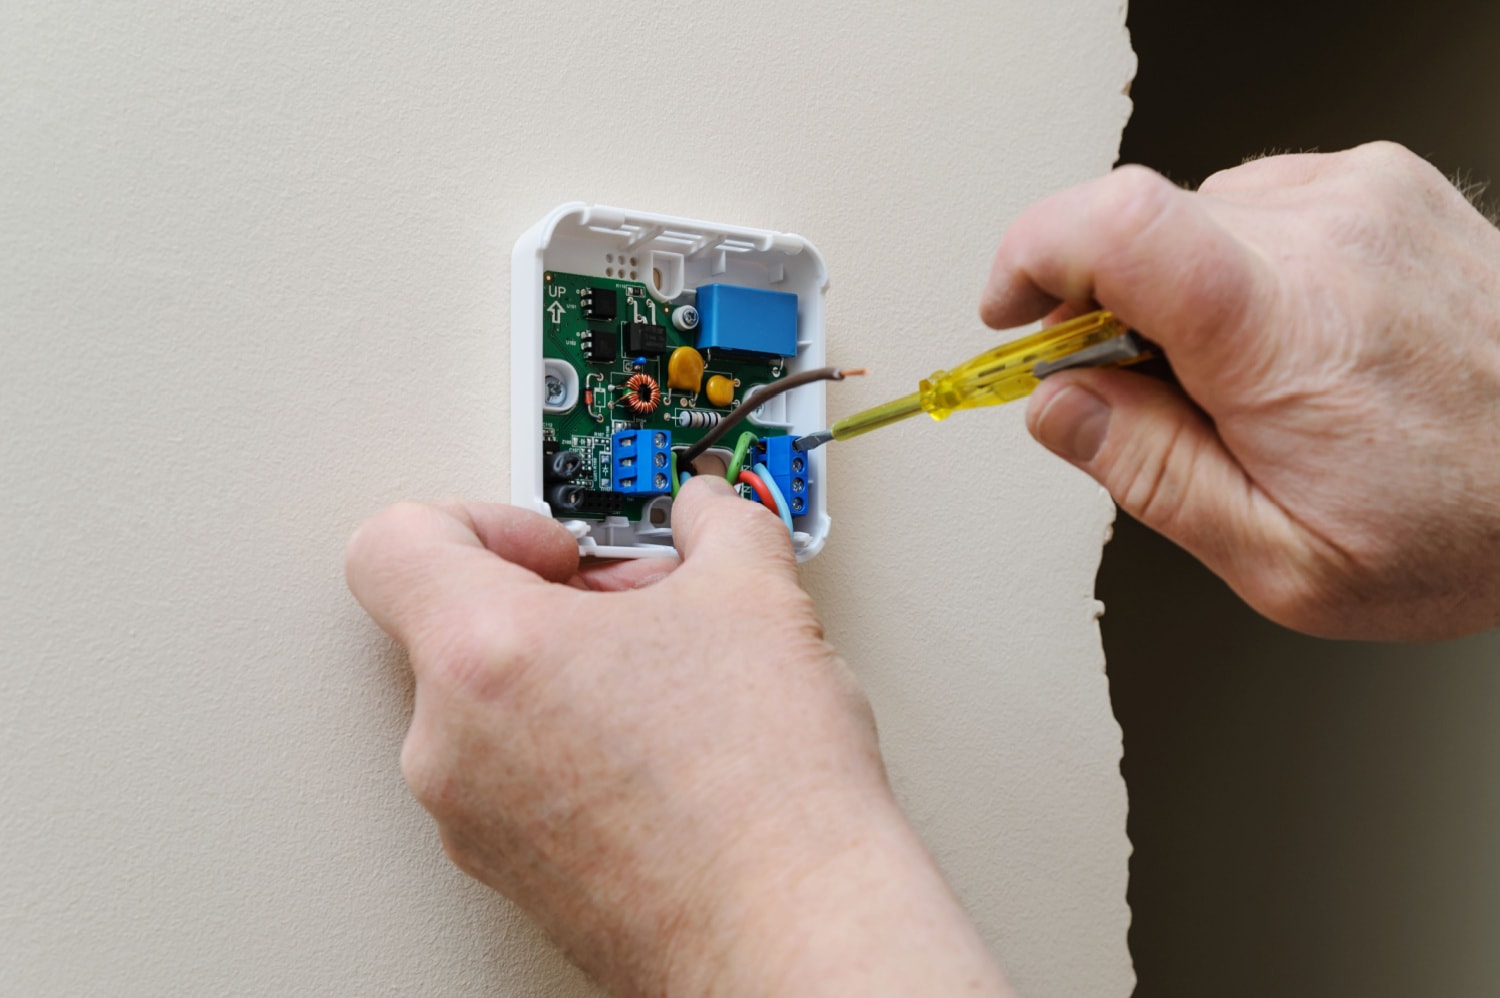 Installing or unscrewing a thermostat mounting plate on the wall